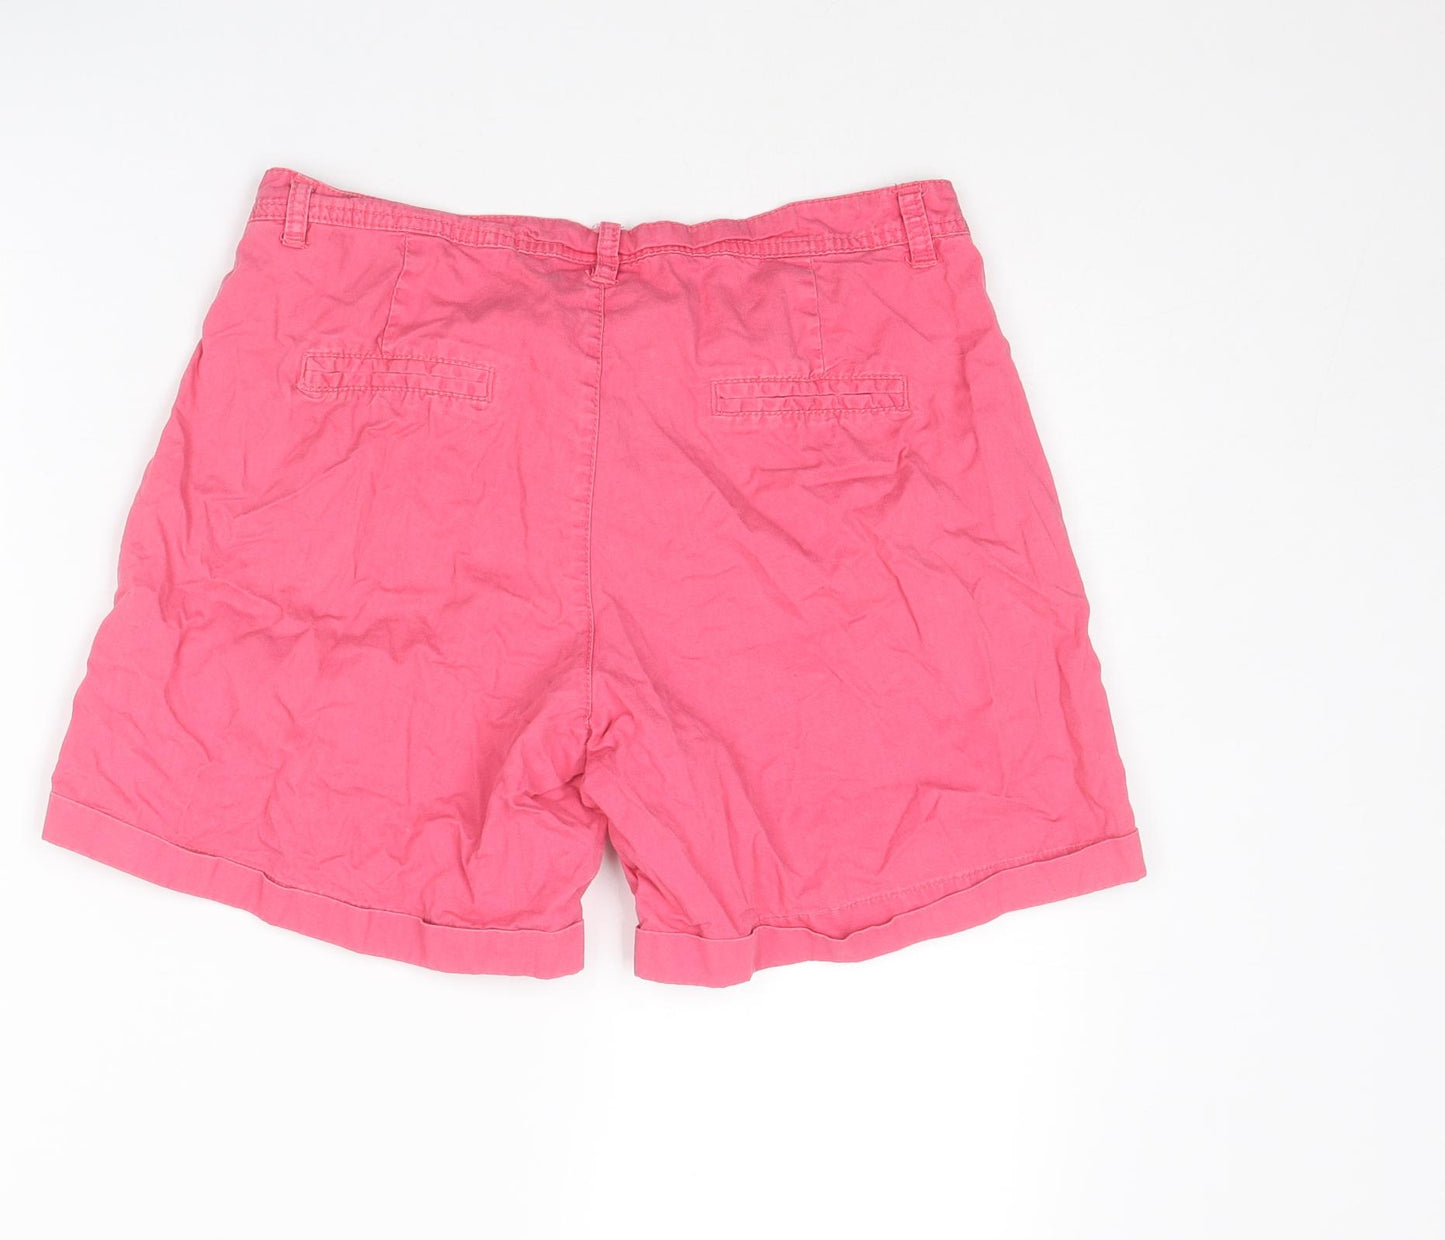 Colours of The World Womens Pink Cotton Chino Shorts Size 10 L6 in Regular Zip